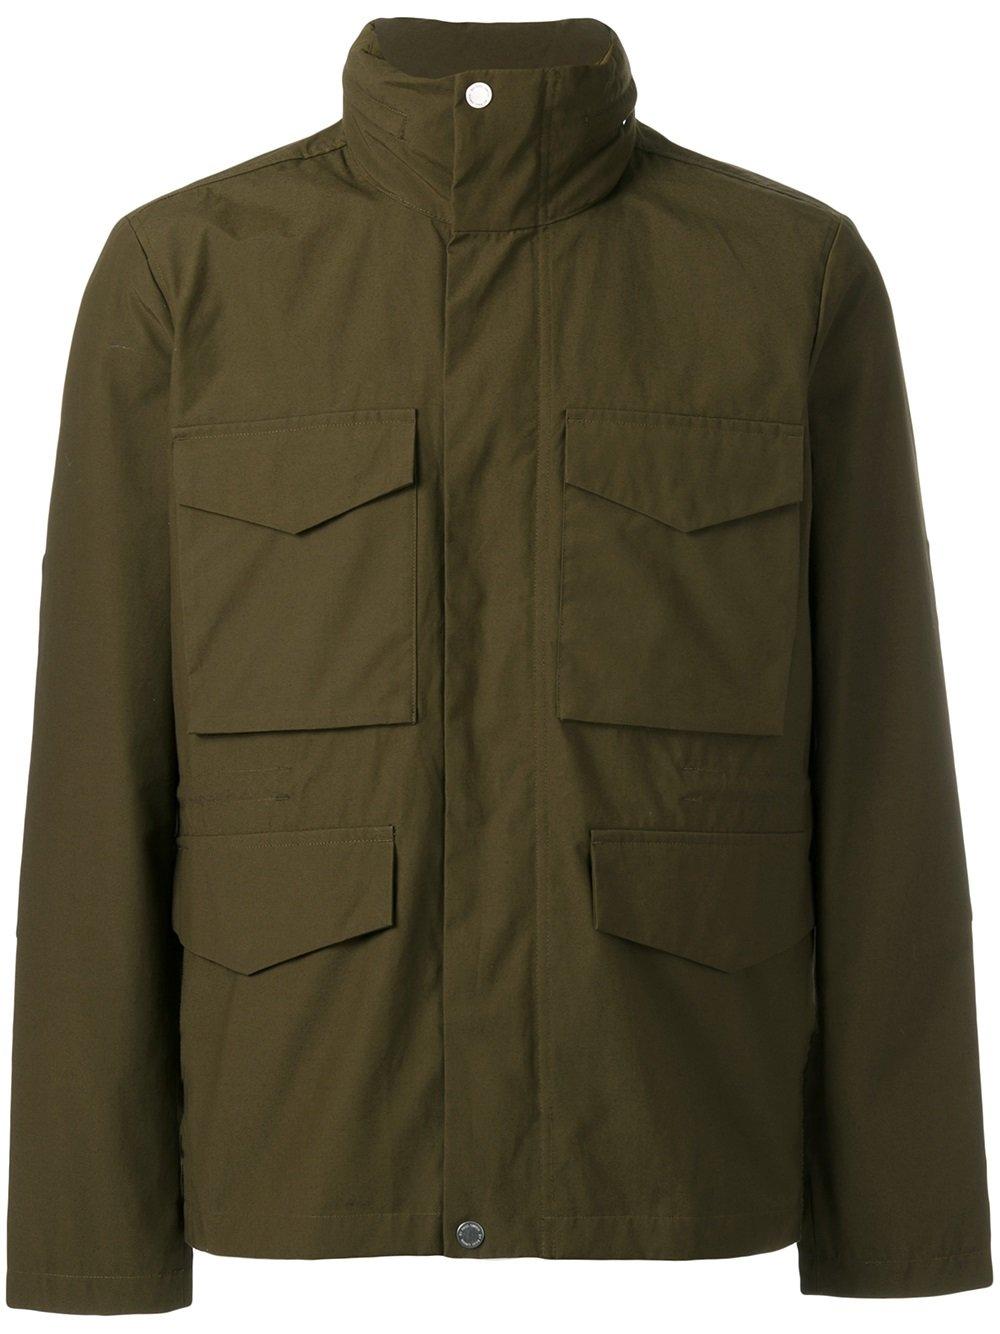 Lyst - Ps By Paul Smith Patch Pocket Hooded Jacket in Green for Men